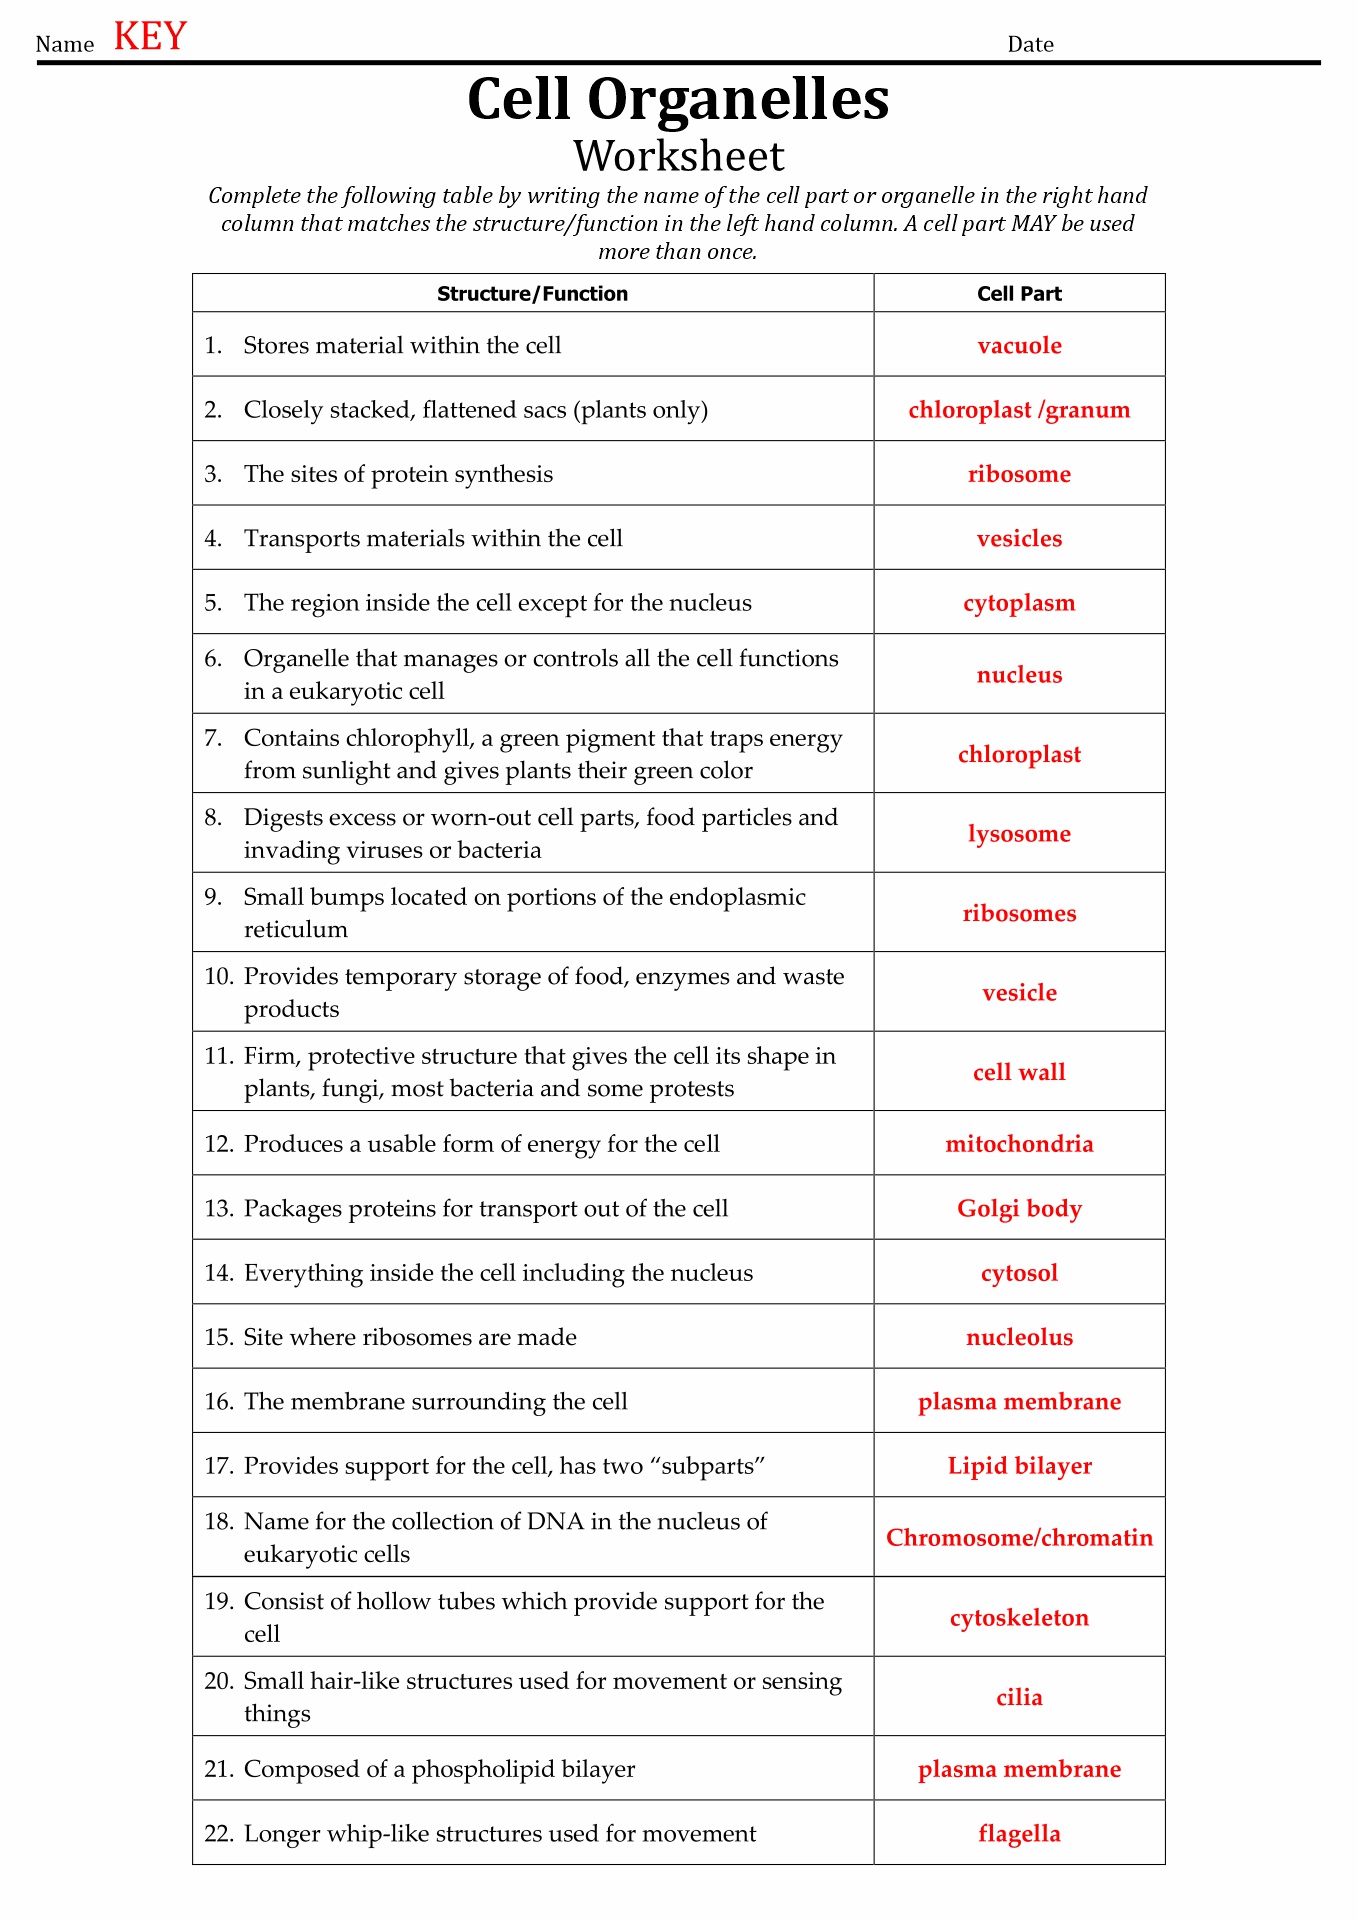 Cell and Organelles Worksheet Answer Key